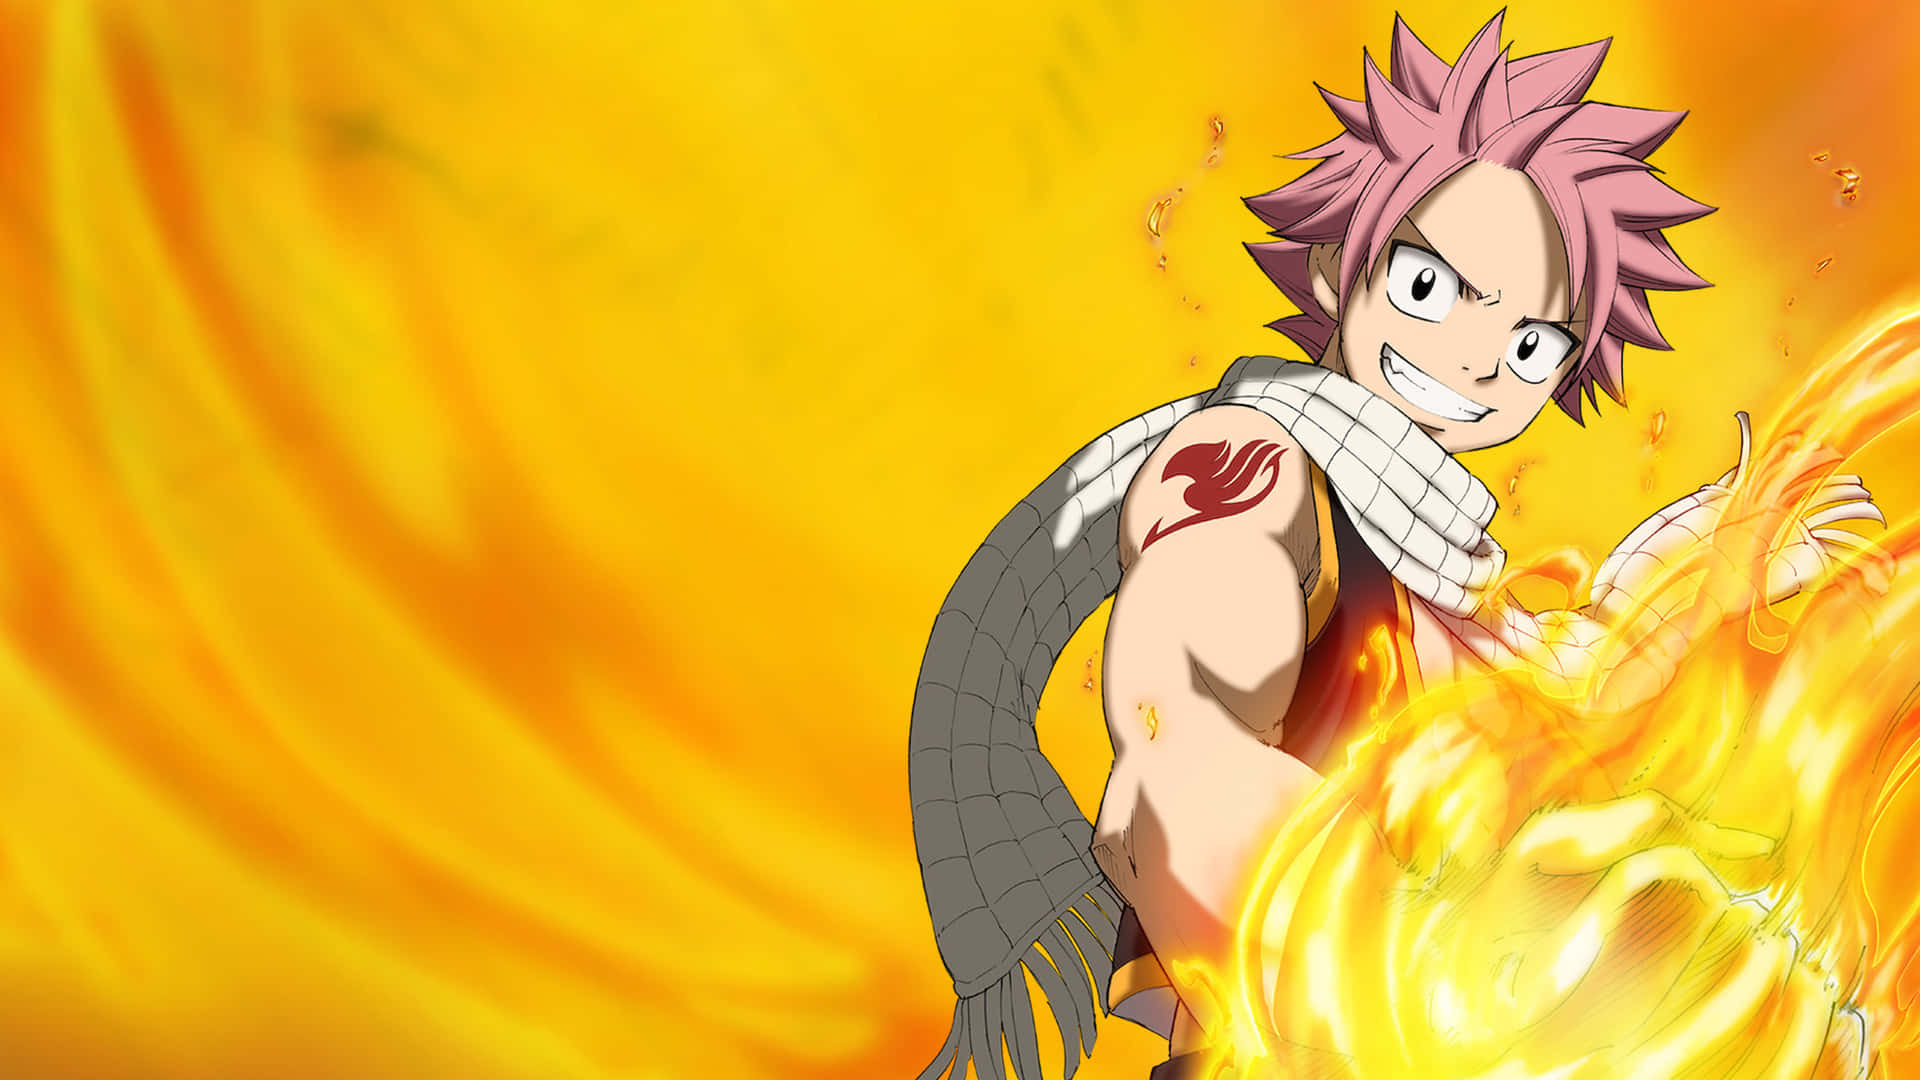 Fairy Tail - The Epic Adventure Begins